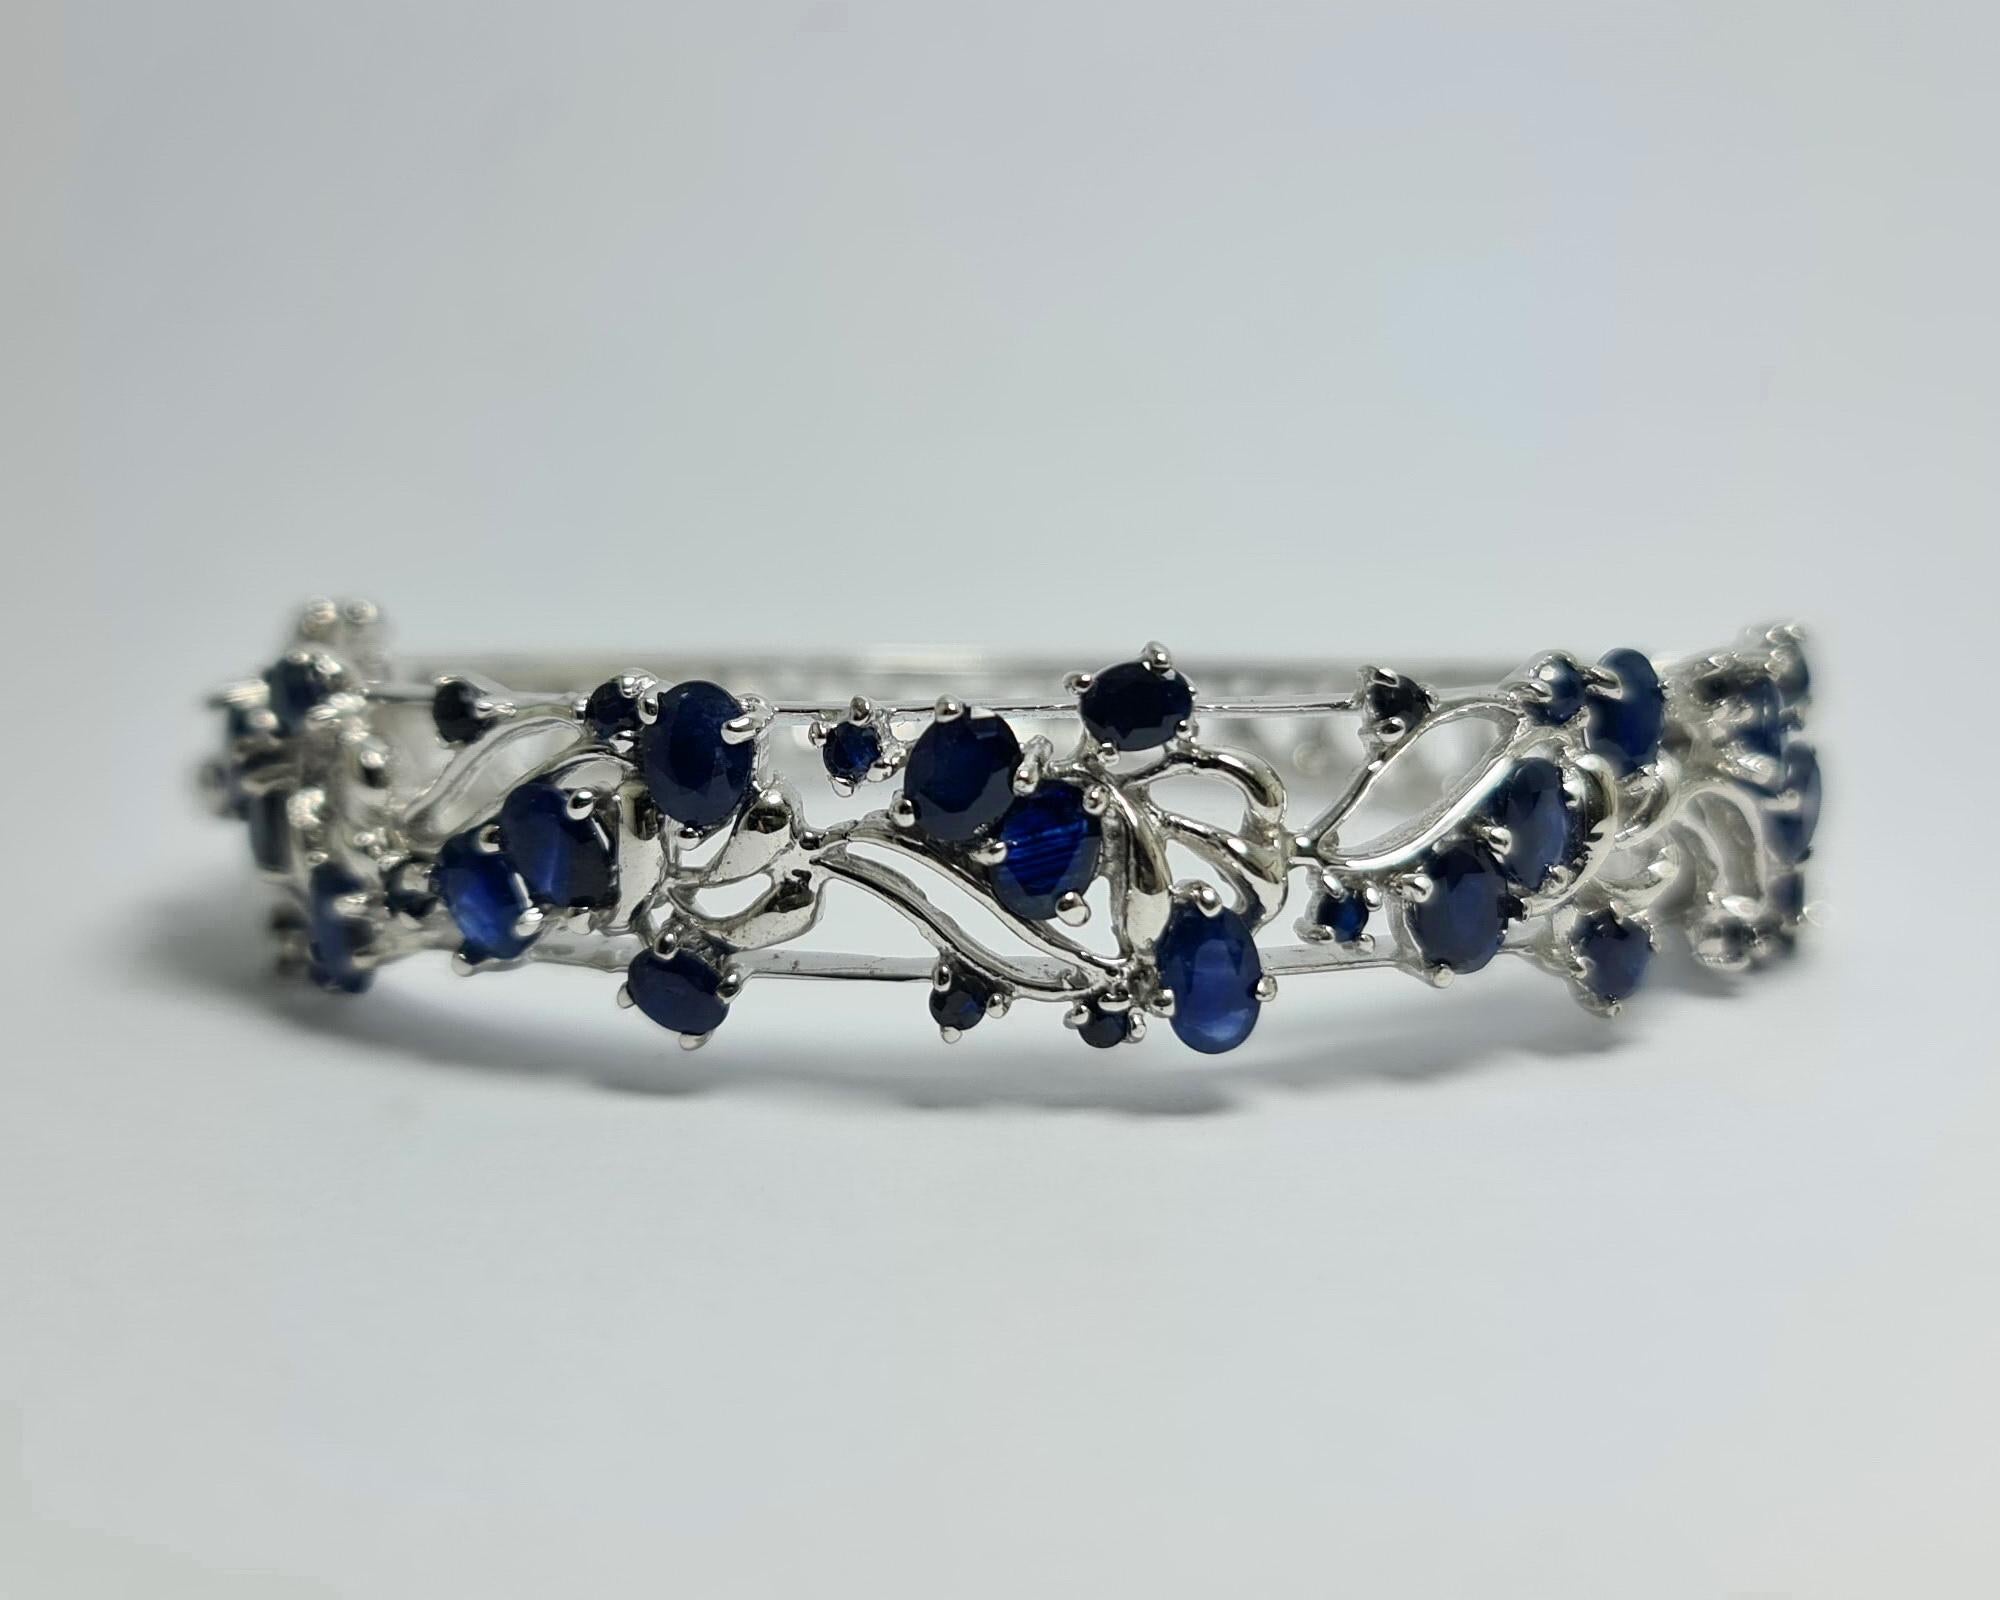 Natural Untreated Blue Sapphire Thailand Origin,set in Pure .925 Sterling Silver with Rhodium Plating on this beautiful  Hinged Bangle Cuff Bracelet 

Carats weight : 14 carats
Total weight of the bracelet : 27 grams